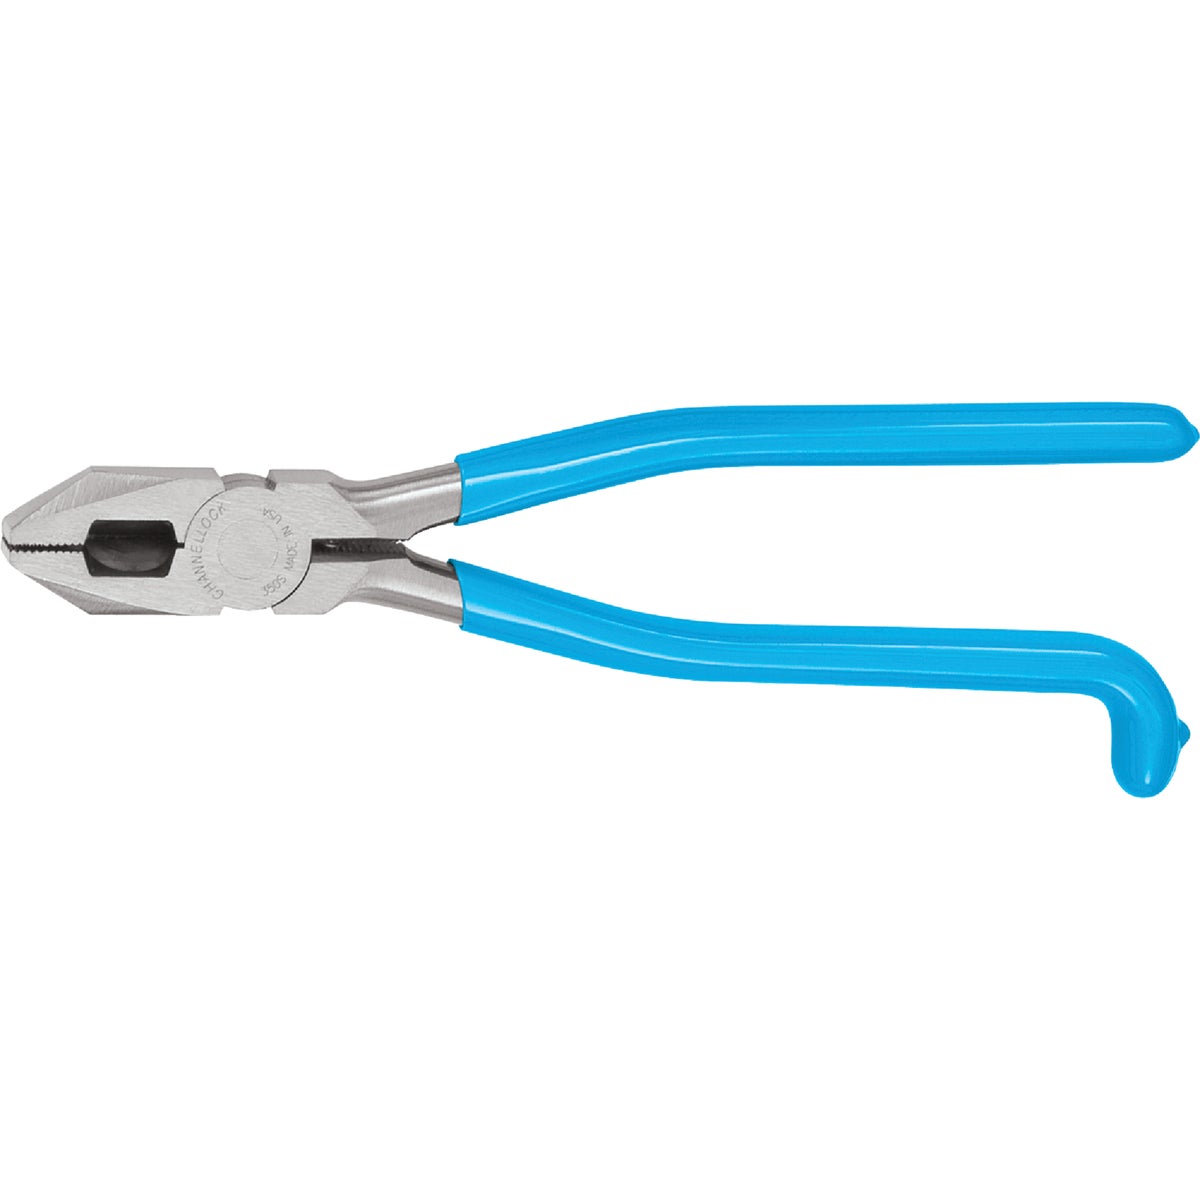 Channellock 9 In. Polished High-Carbon Drop-Forged Steel Ironworker Pliers